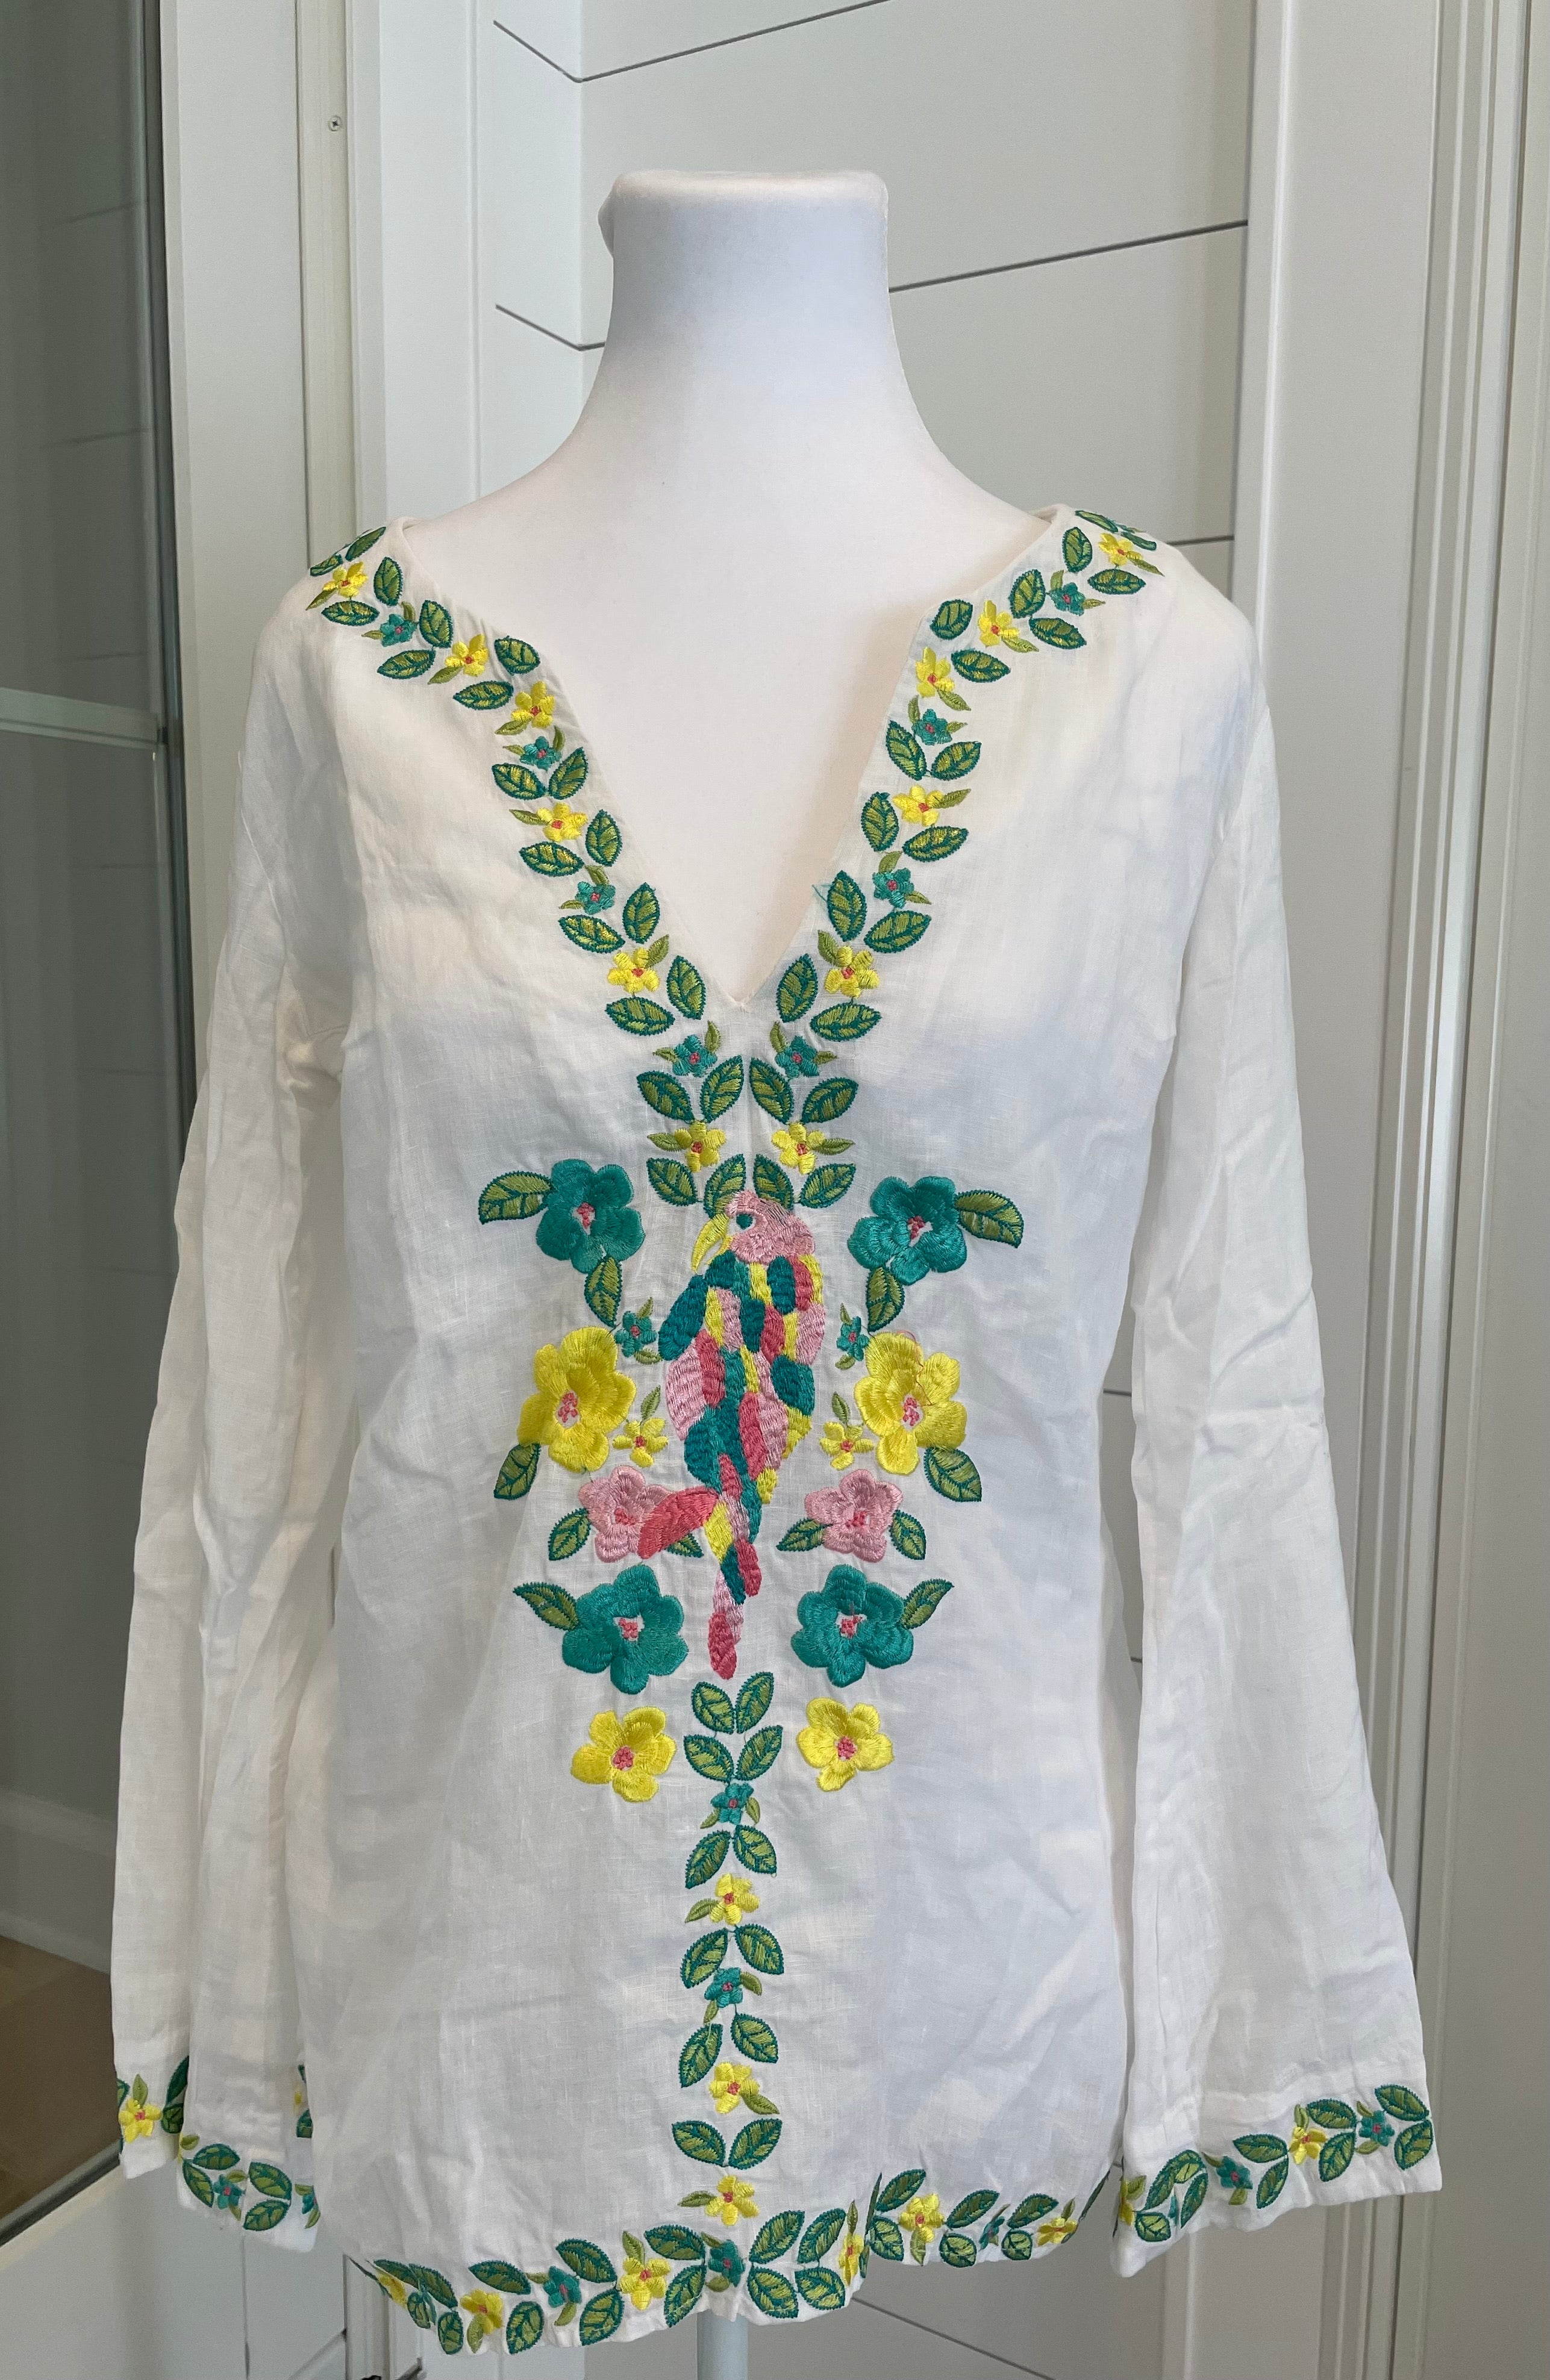 Lilly Pulitzer Linen Parrot Tunic, White Womens Size S